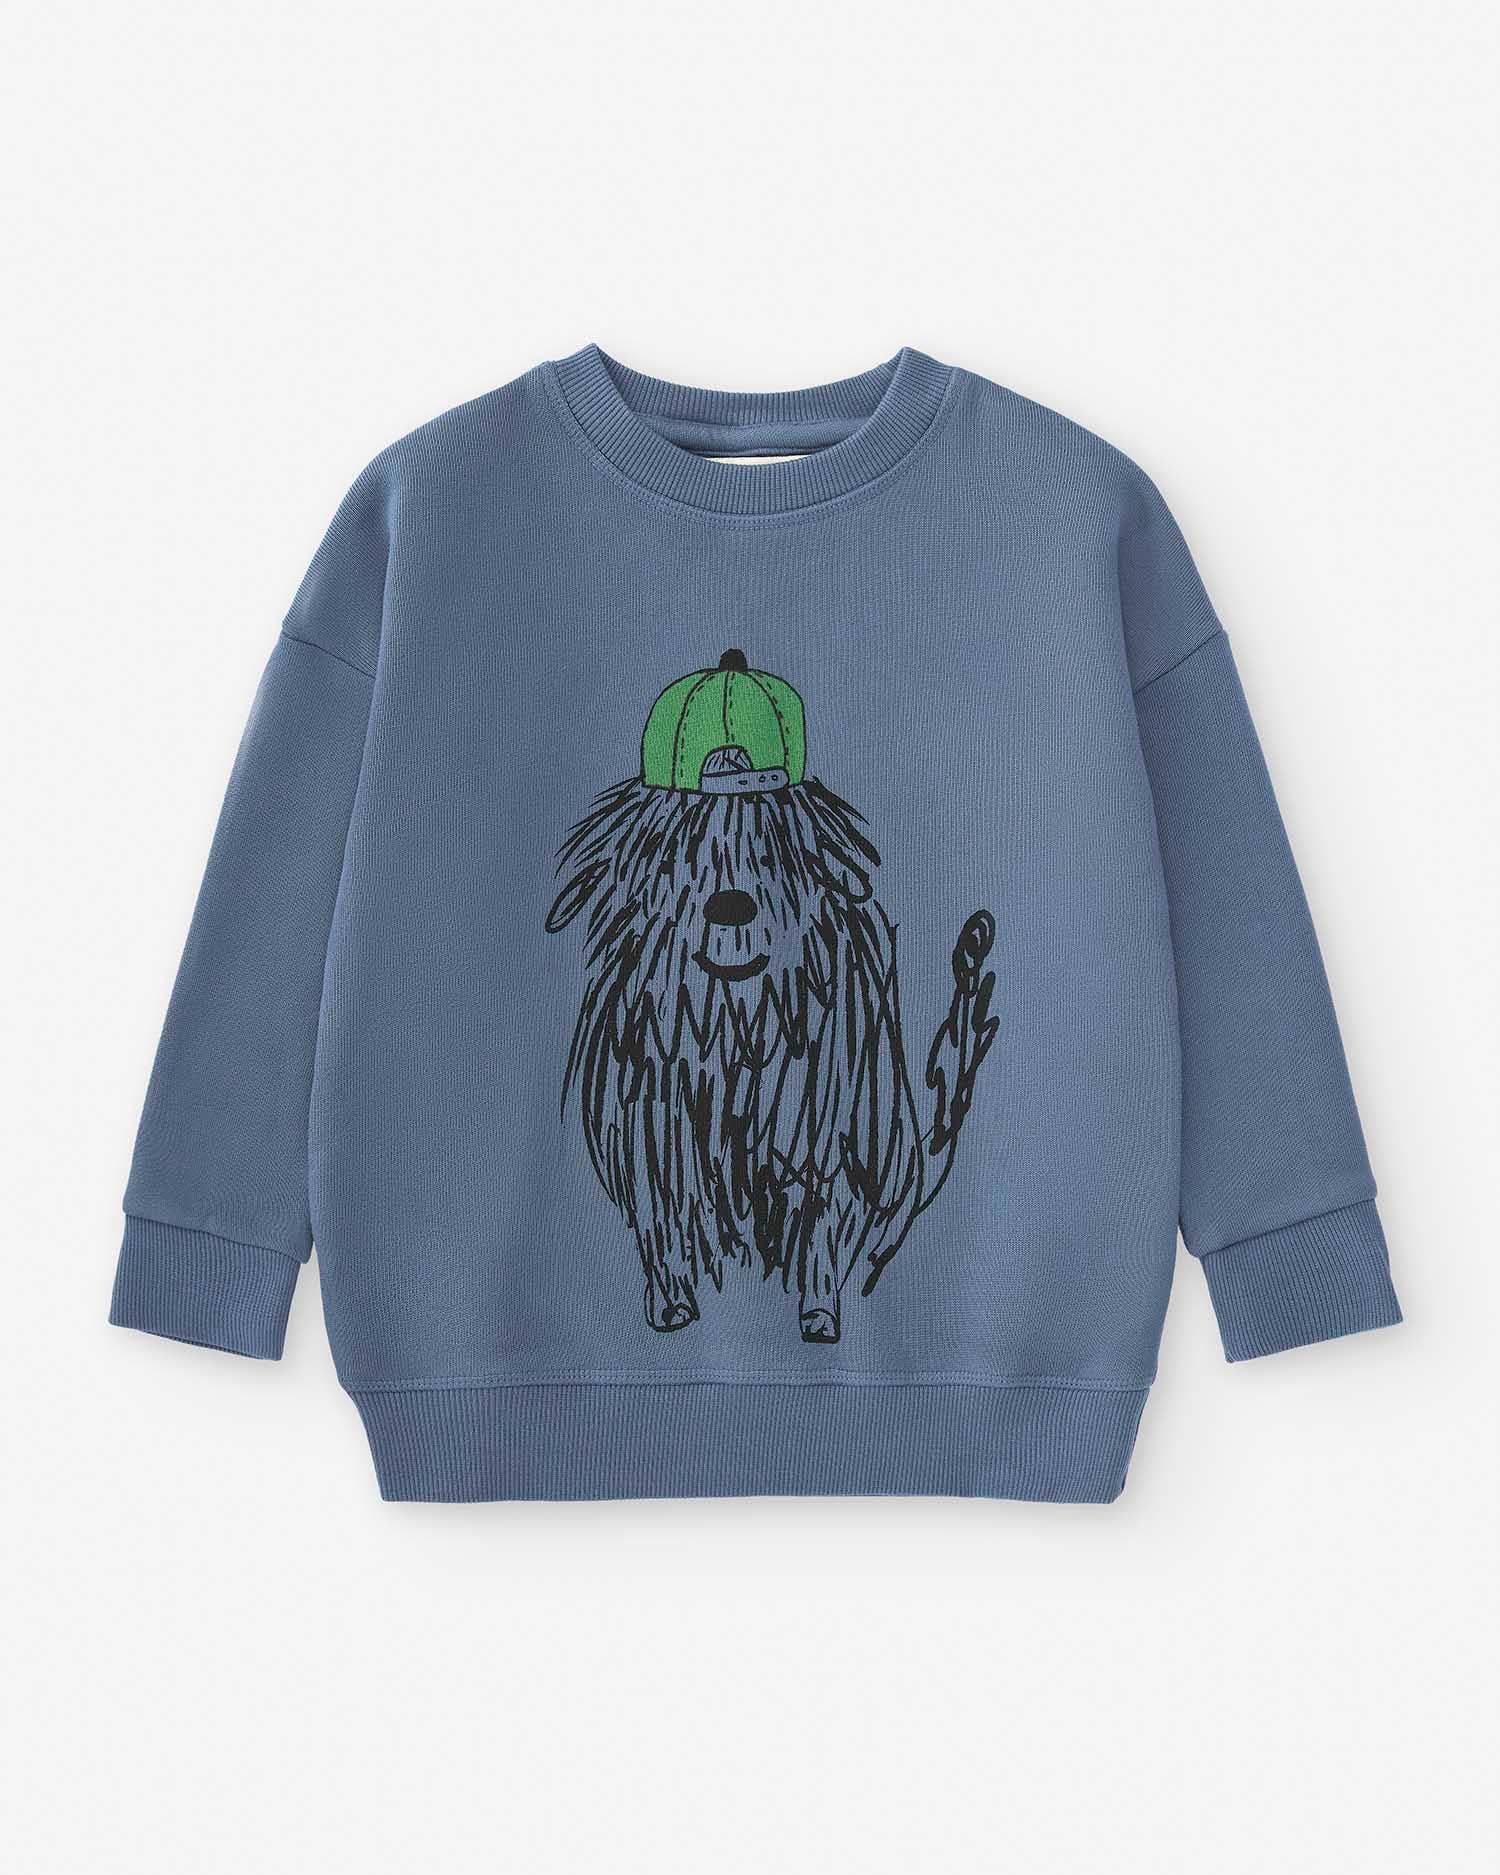 Child's organic cotton sweatshirt in washed gray with YEAH! print